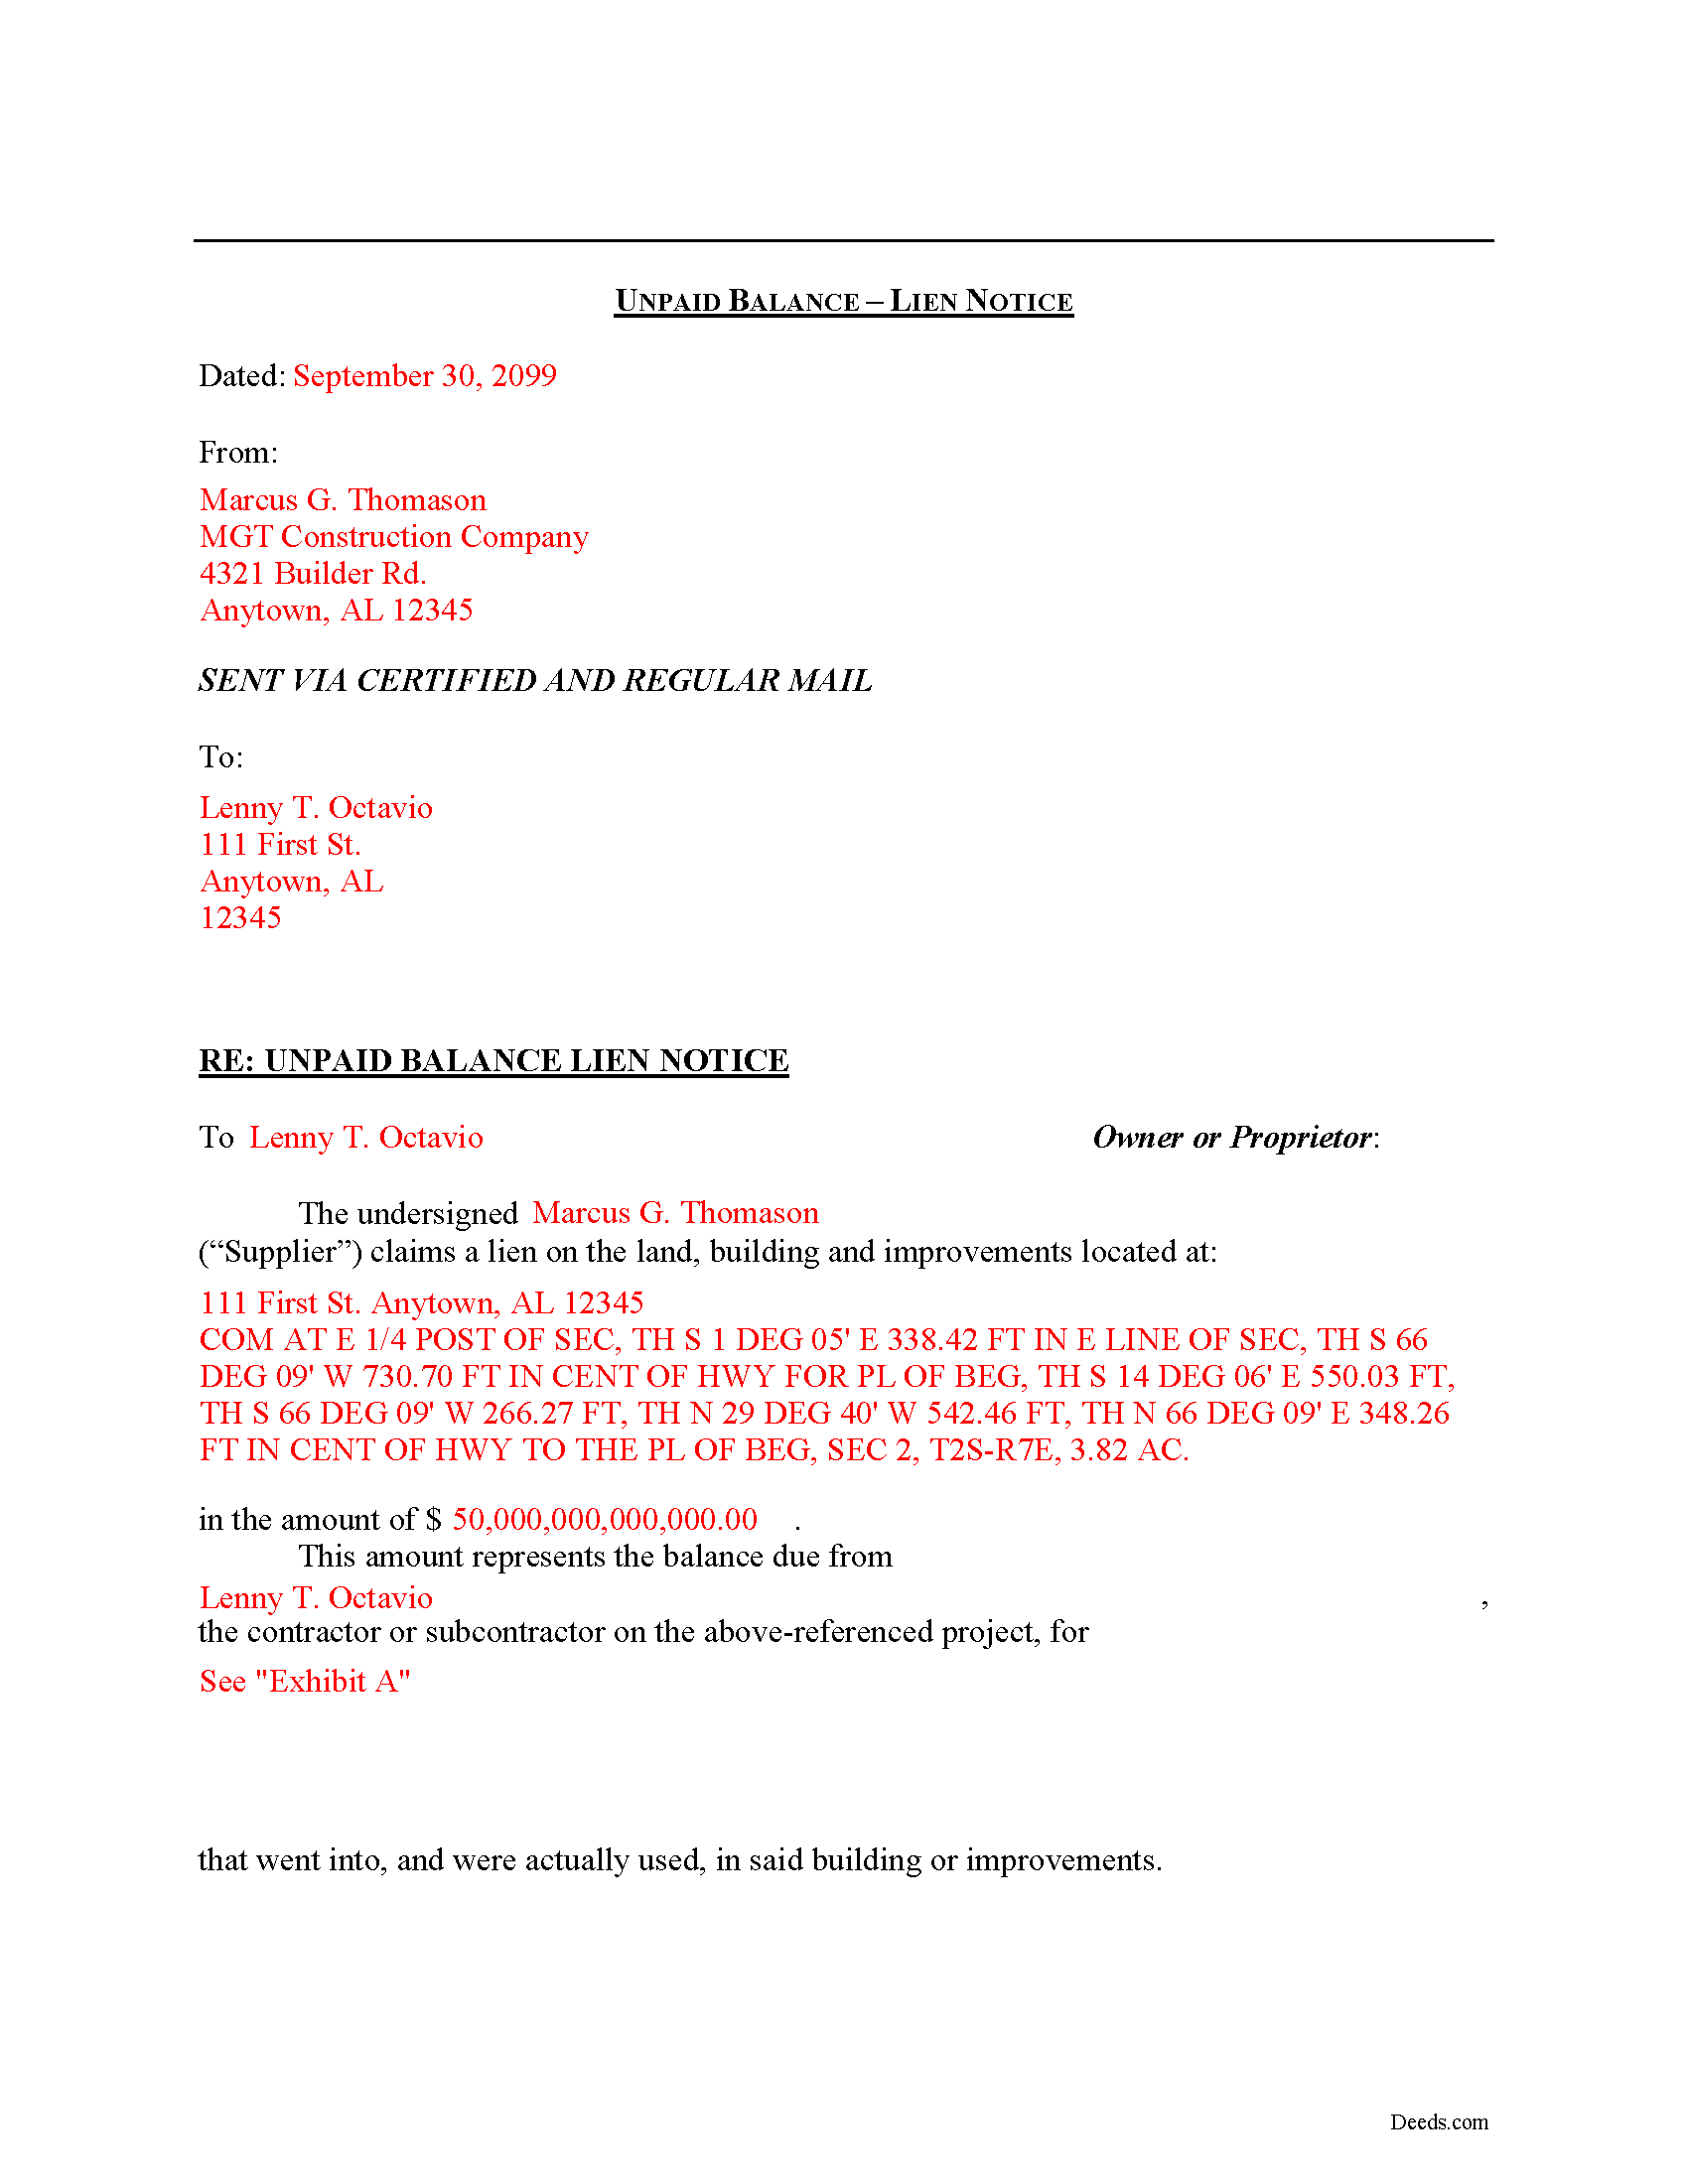 Completed Example of the Notice of Unpaid Balance Lien Document